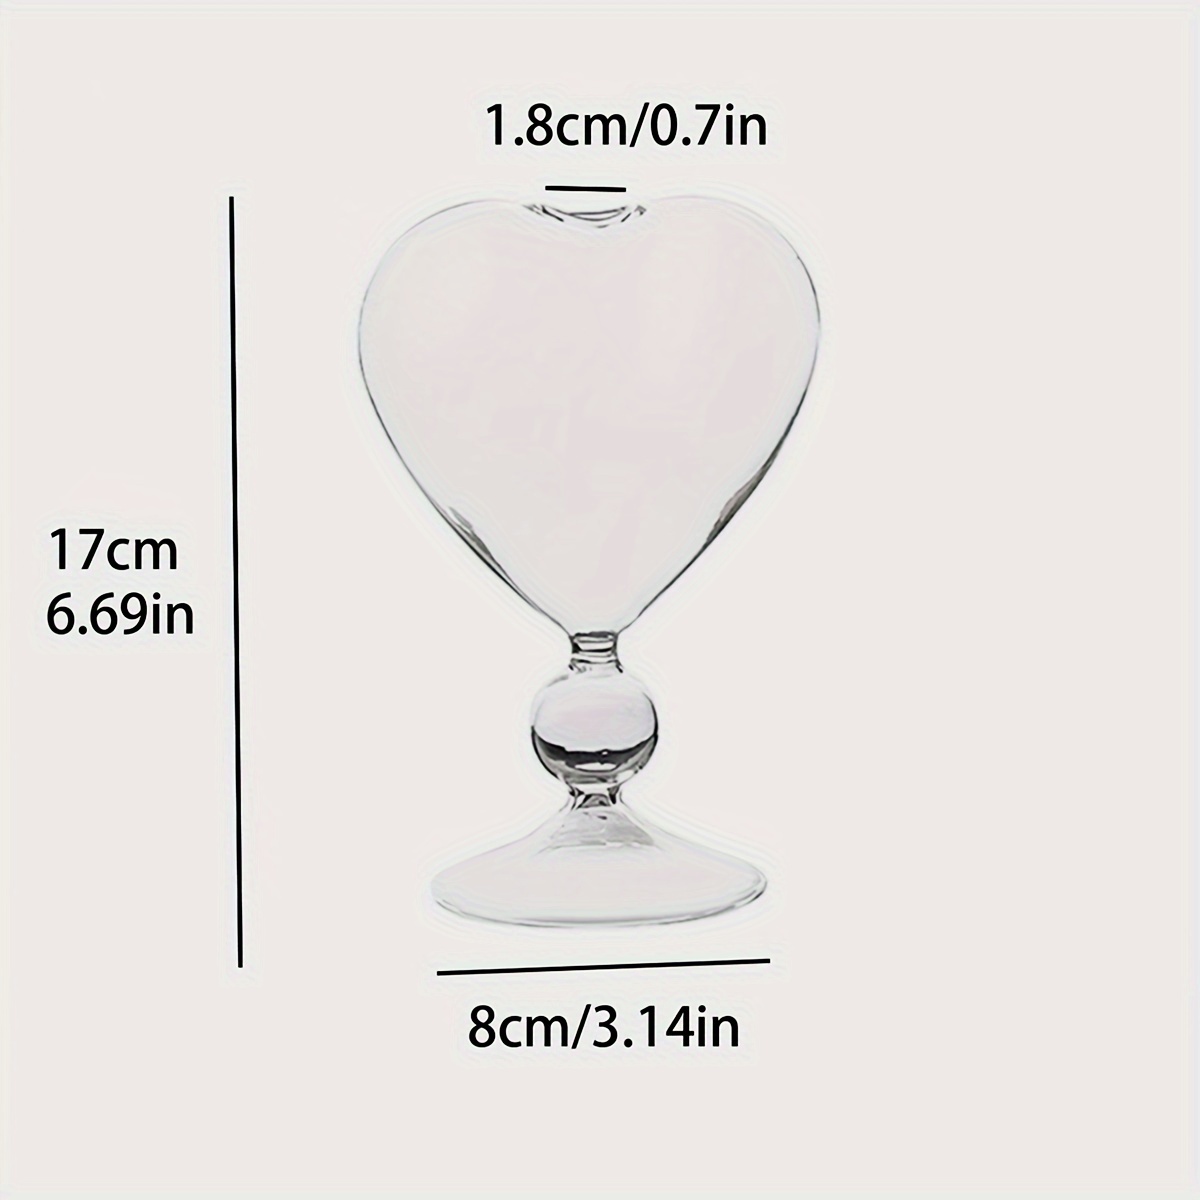 Creative Cocktail Glasses Cups: Clear Glass Heart Shaped Cocktail Wine  Glasses Novelty Wine Champagne Cup Schooner Goblet Cup Glasses Bar Club 